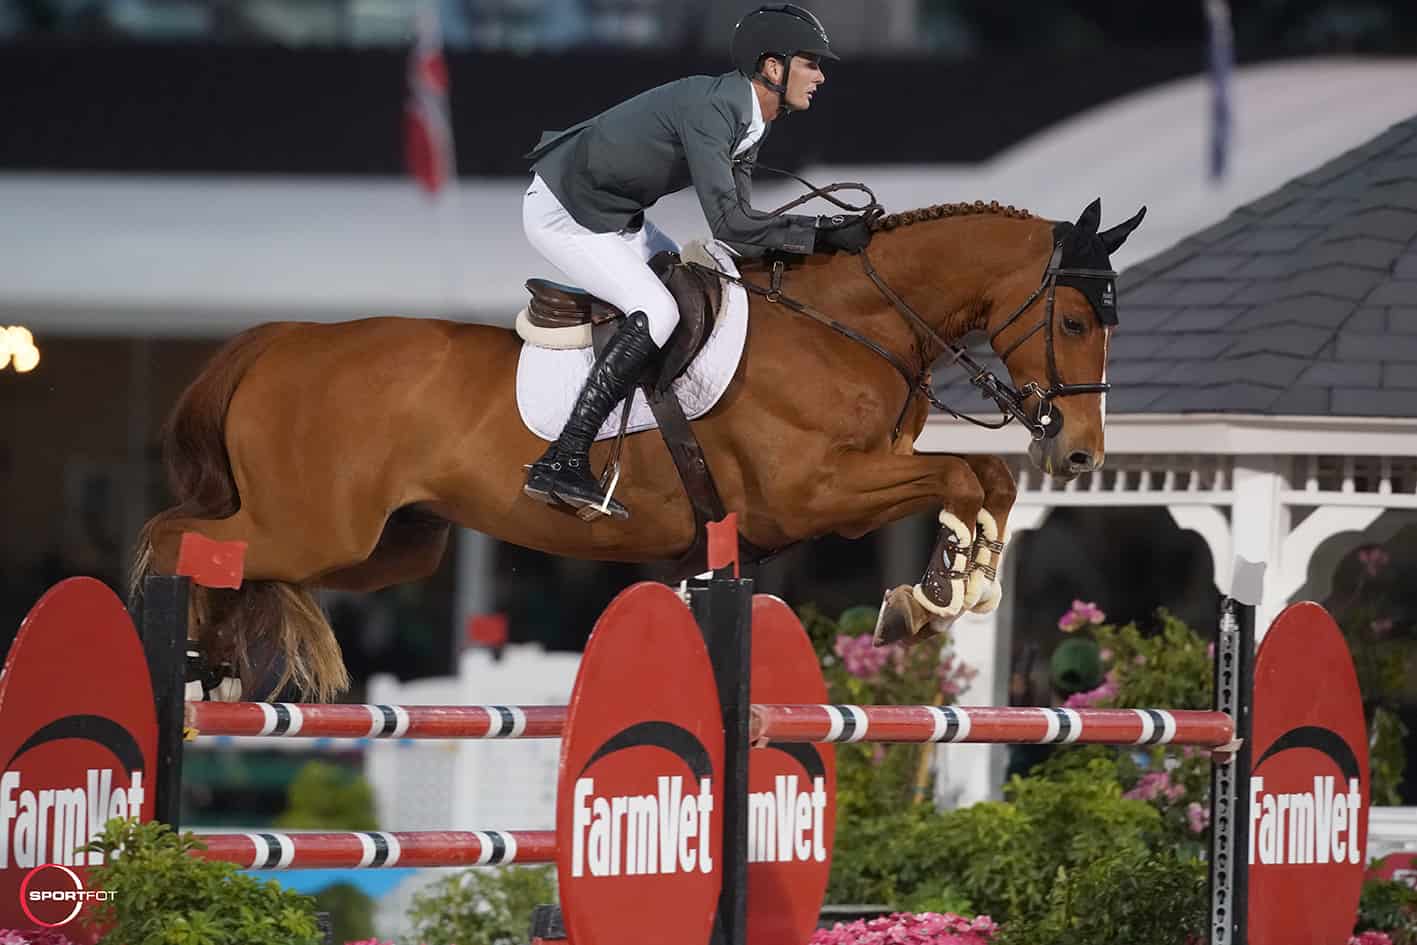 Spencer Smith Is Only Clear to Win the $132,000 Horseware Ireland Grand Prix CSI 3*